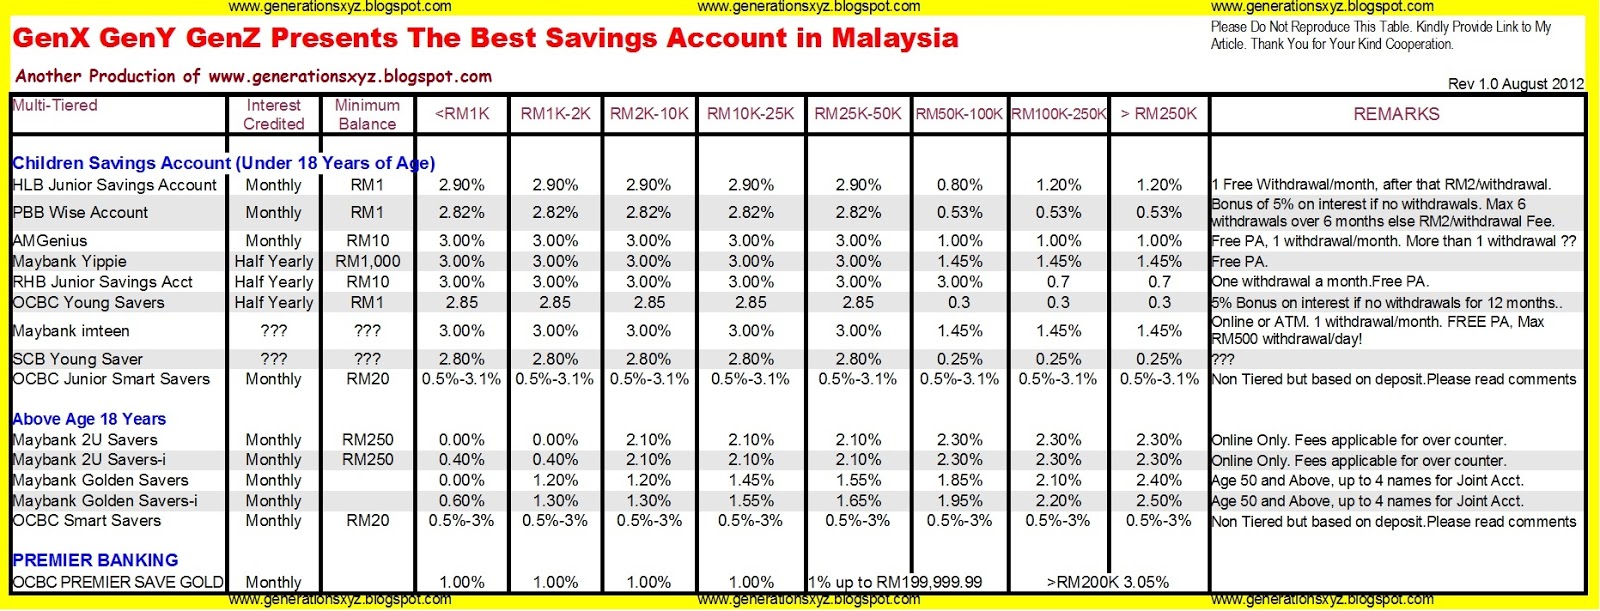 What are some typical interest rates for savings accounts?